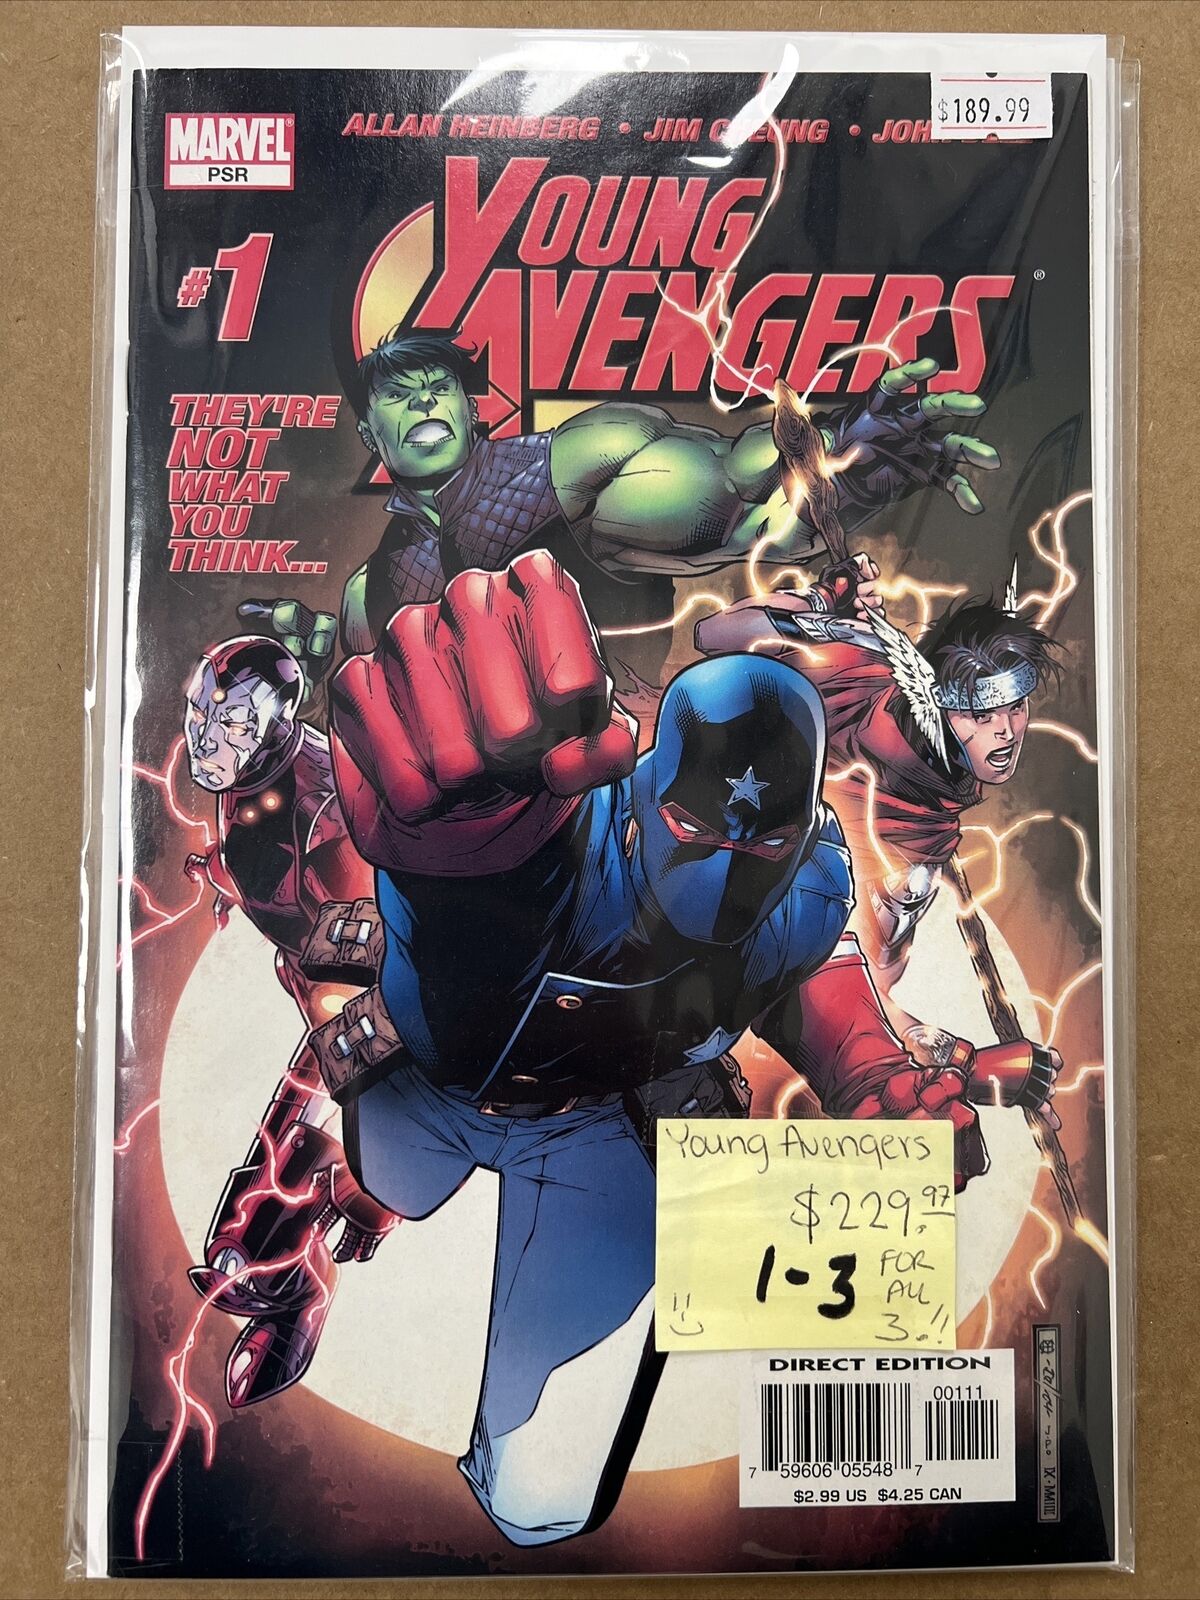 Young Avengers #1-3 NM- 1st Appearance of Young Avengers Marvel 2005 - 3 ISSUES